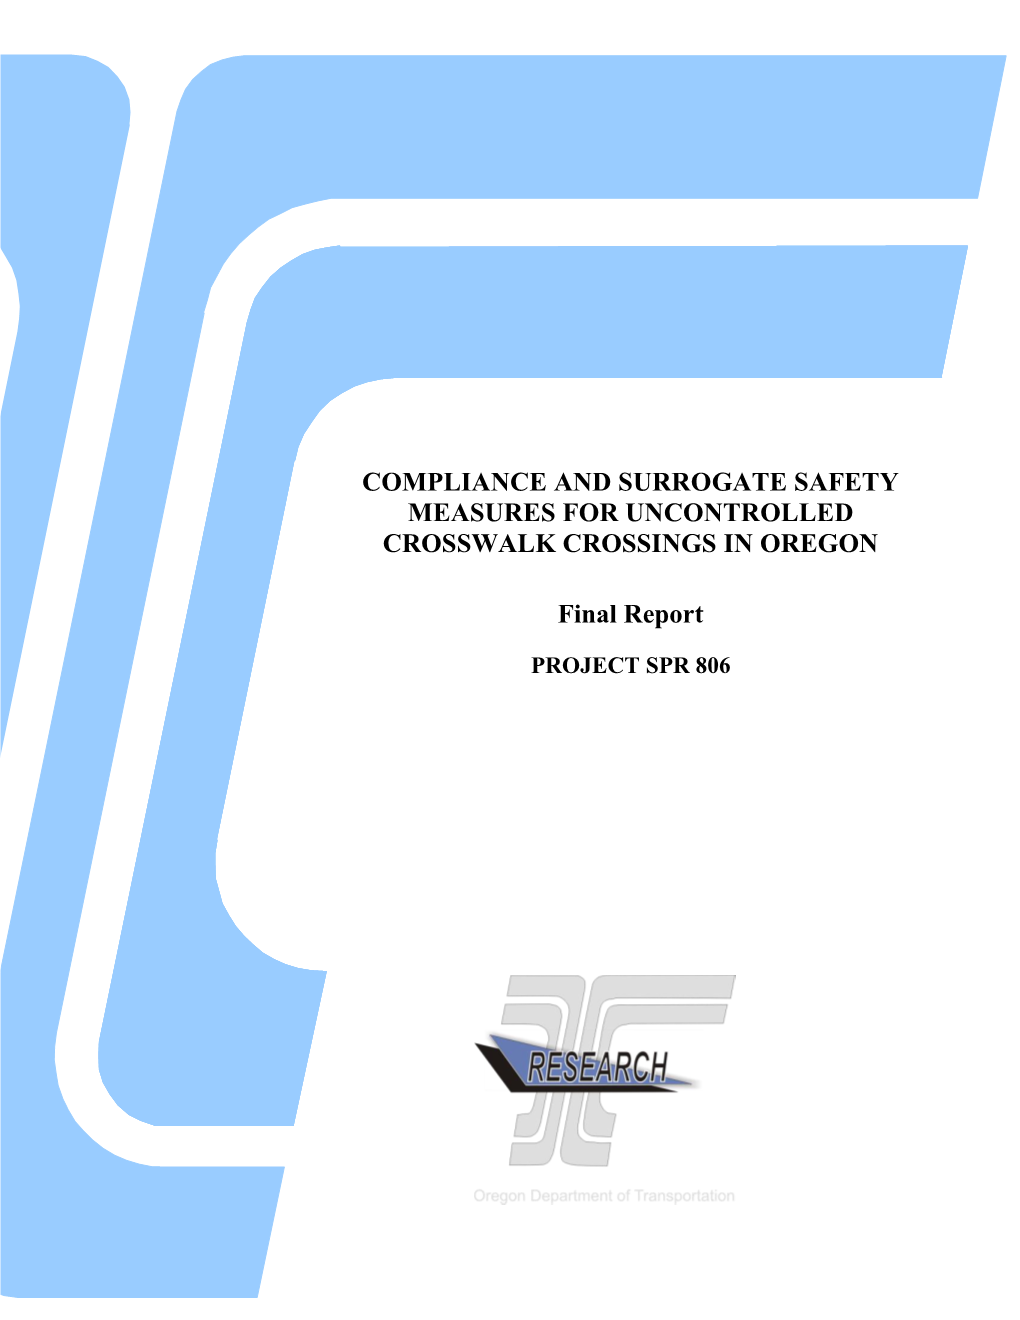 COMPLIANCE and SURROGATE SAFETY MEASURES for UNCONTROLLED CROSSWALK CROSSINGS in OREGON Draft Final Report